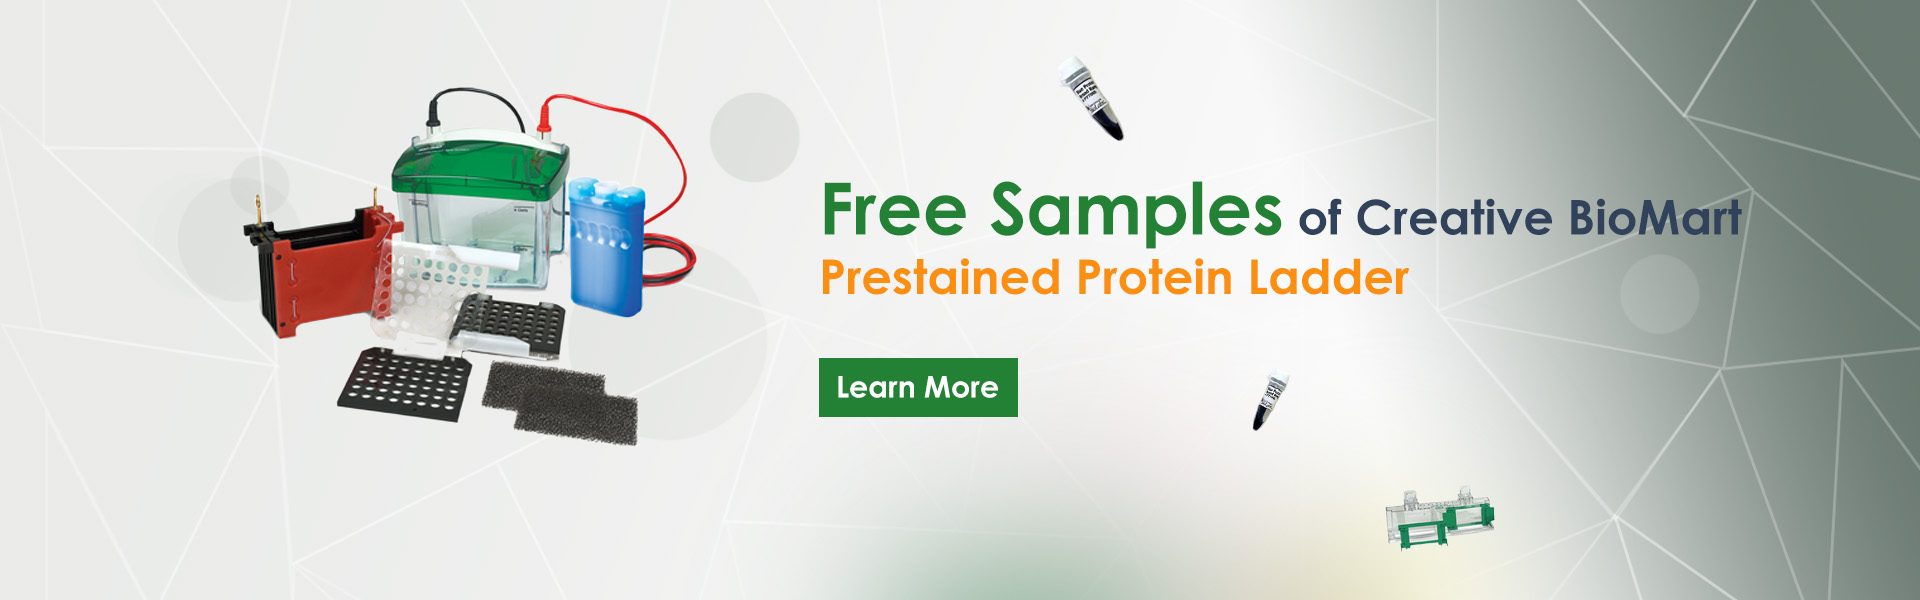 Free Samples of Creative BioMart Prestained Protein Ladder